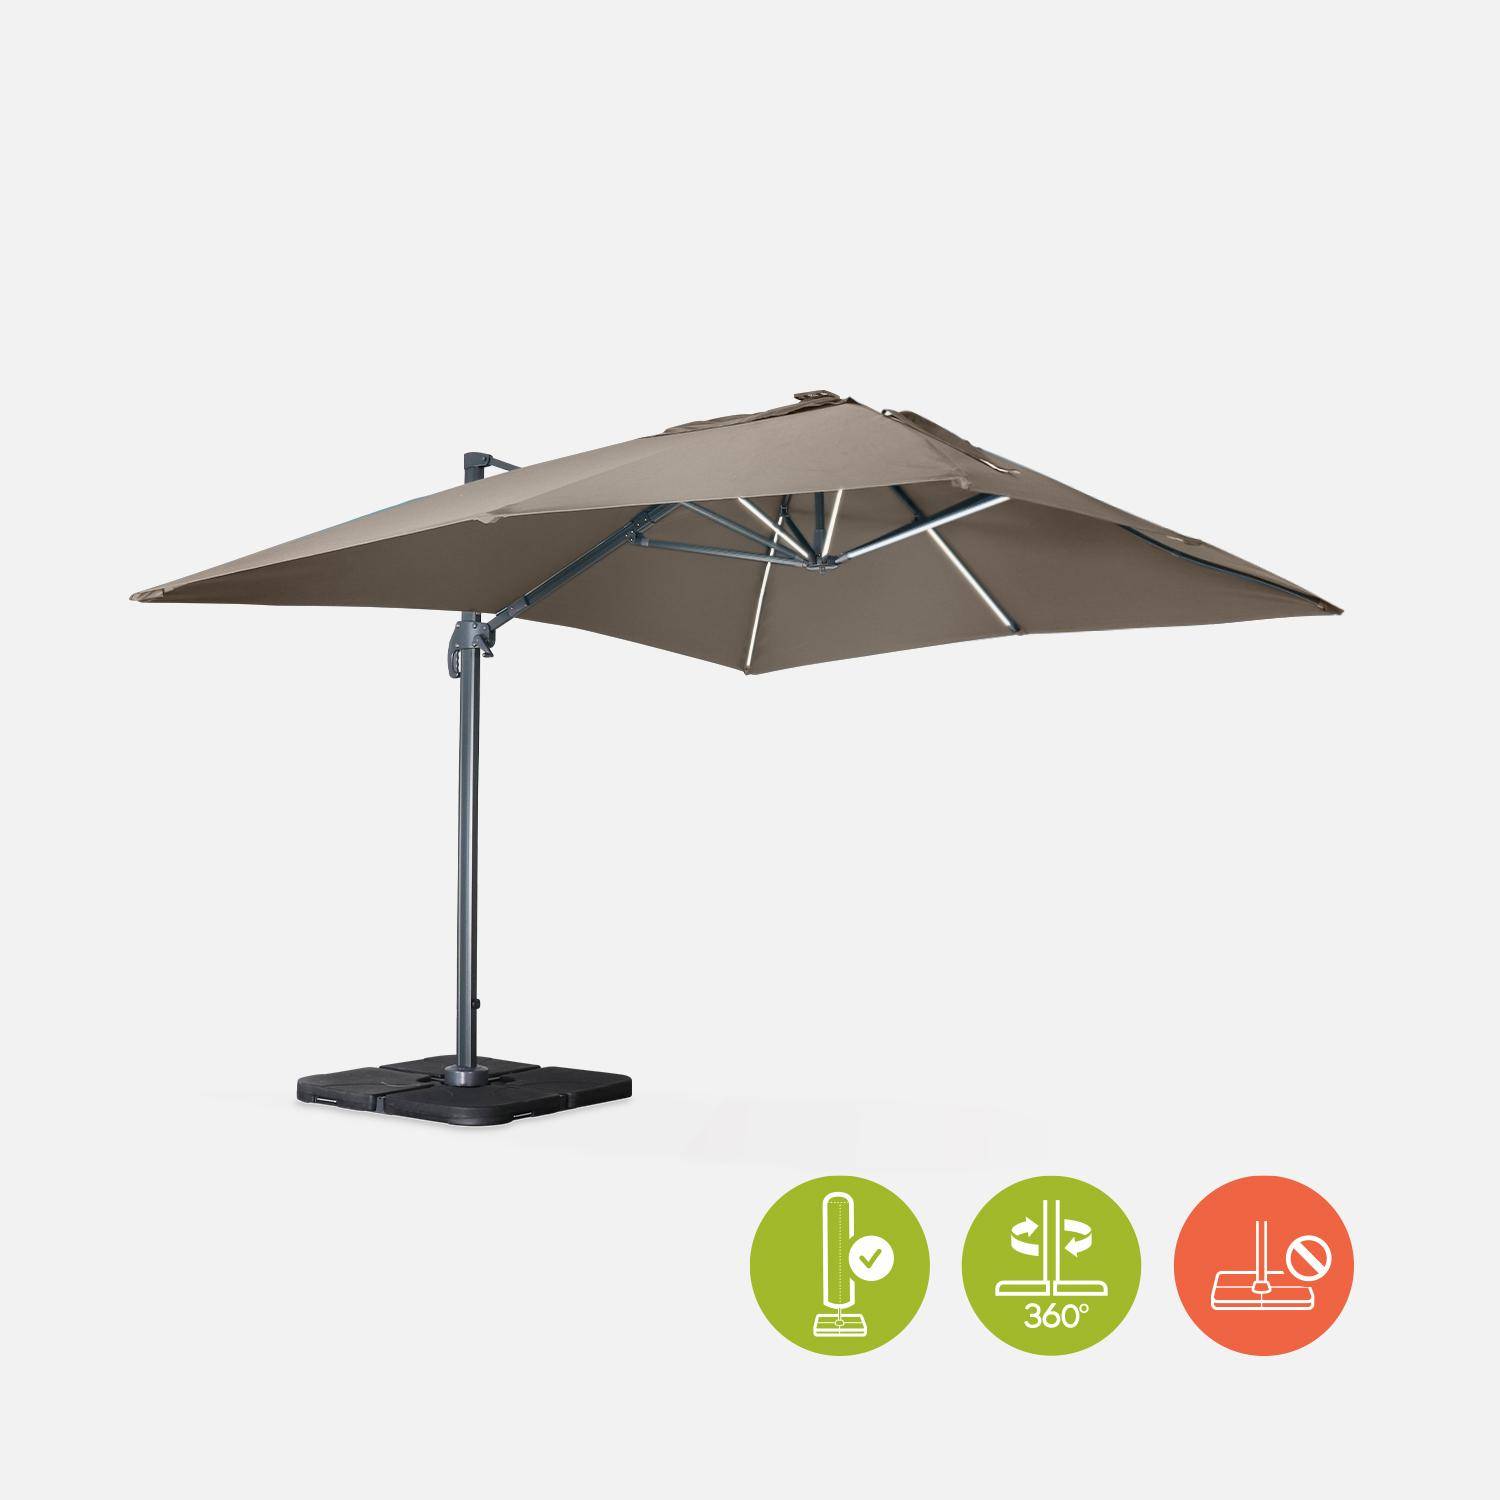 Premium rectangular 3x4m cantilever parasol with solar-powered integrated LED lights - Cantilever parasol, tiltable, foldable with 360° rotation, solar charging, cover included - Luce - Beige-brown,sweeek,Photo2